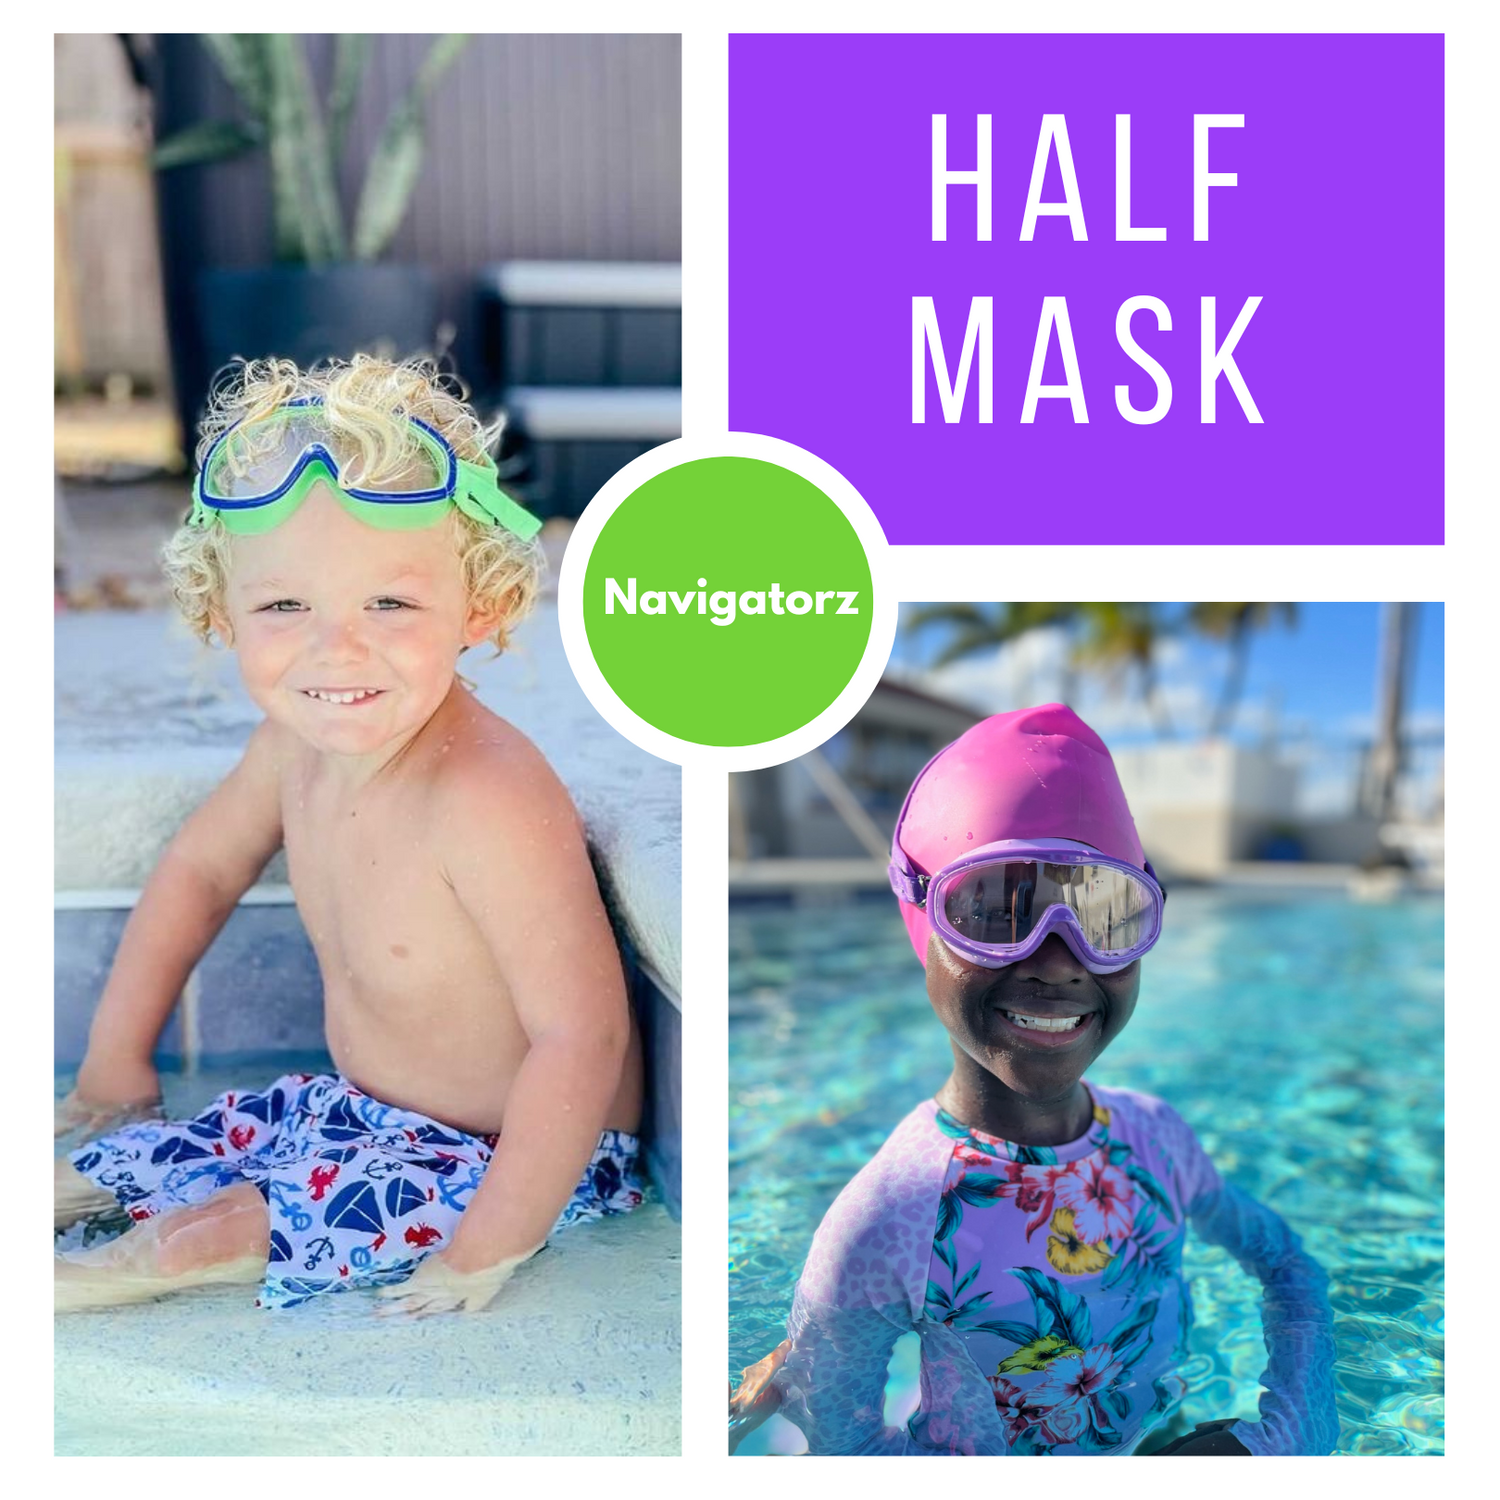 Photo collage with a boy in Frogglez green navigatorz. Girl in bottom corner smiling wearing purple navigatorz half mask. Top right corner text says "Half Mask"